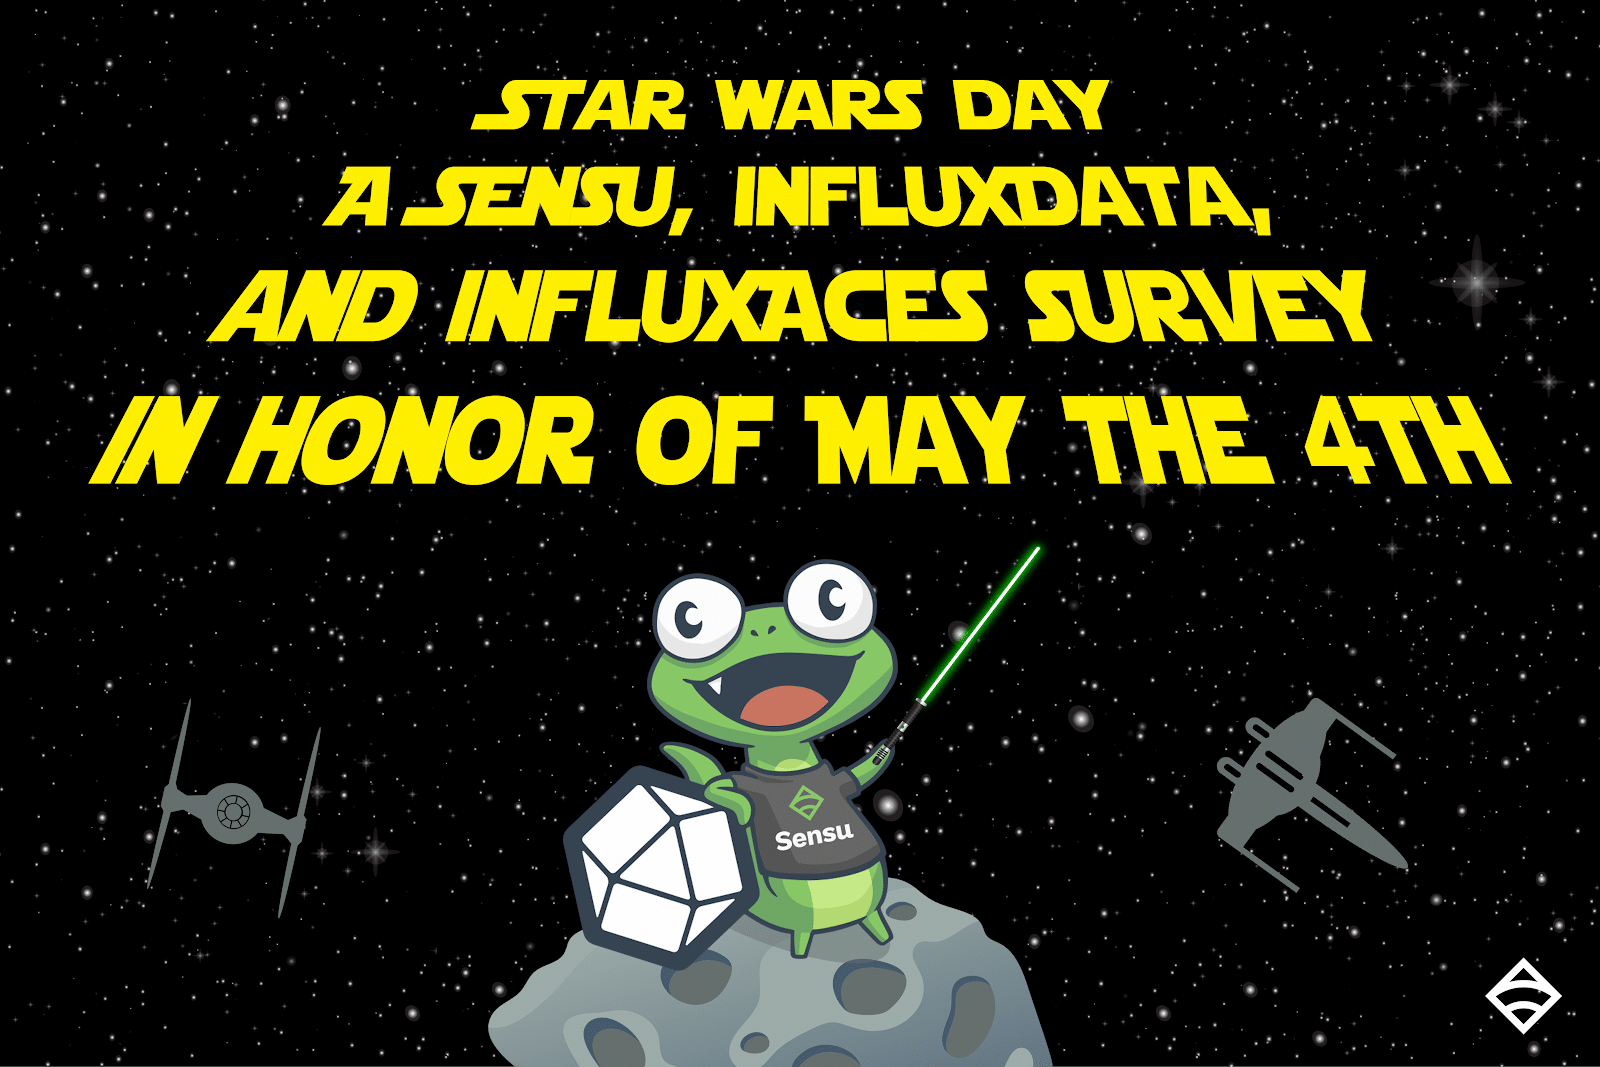 Star Wars Day - May the 4th graphic - InfluxAces - Sensu